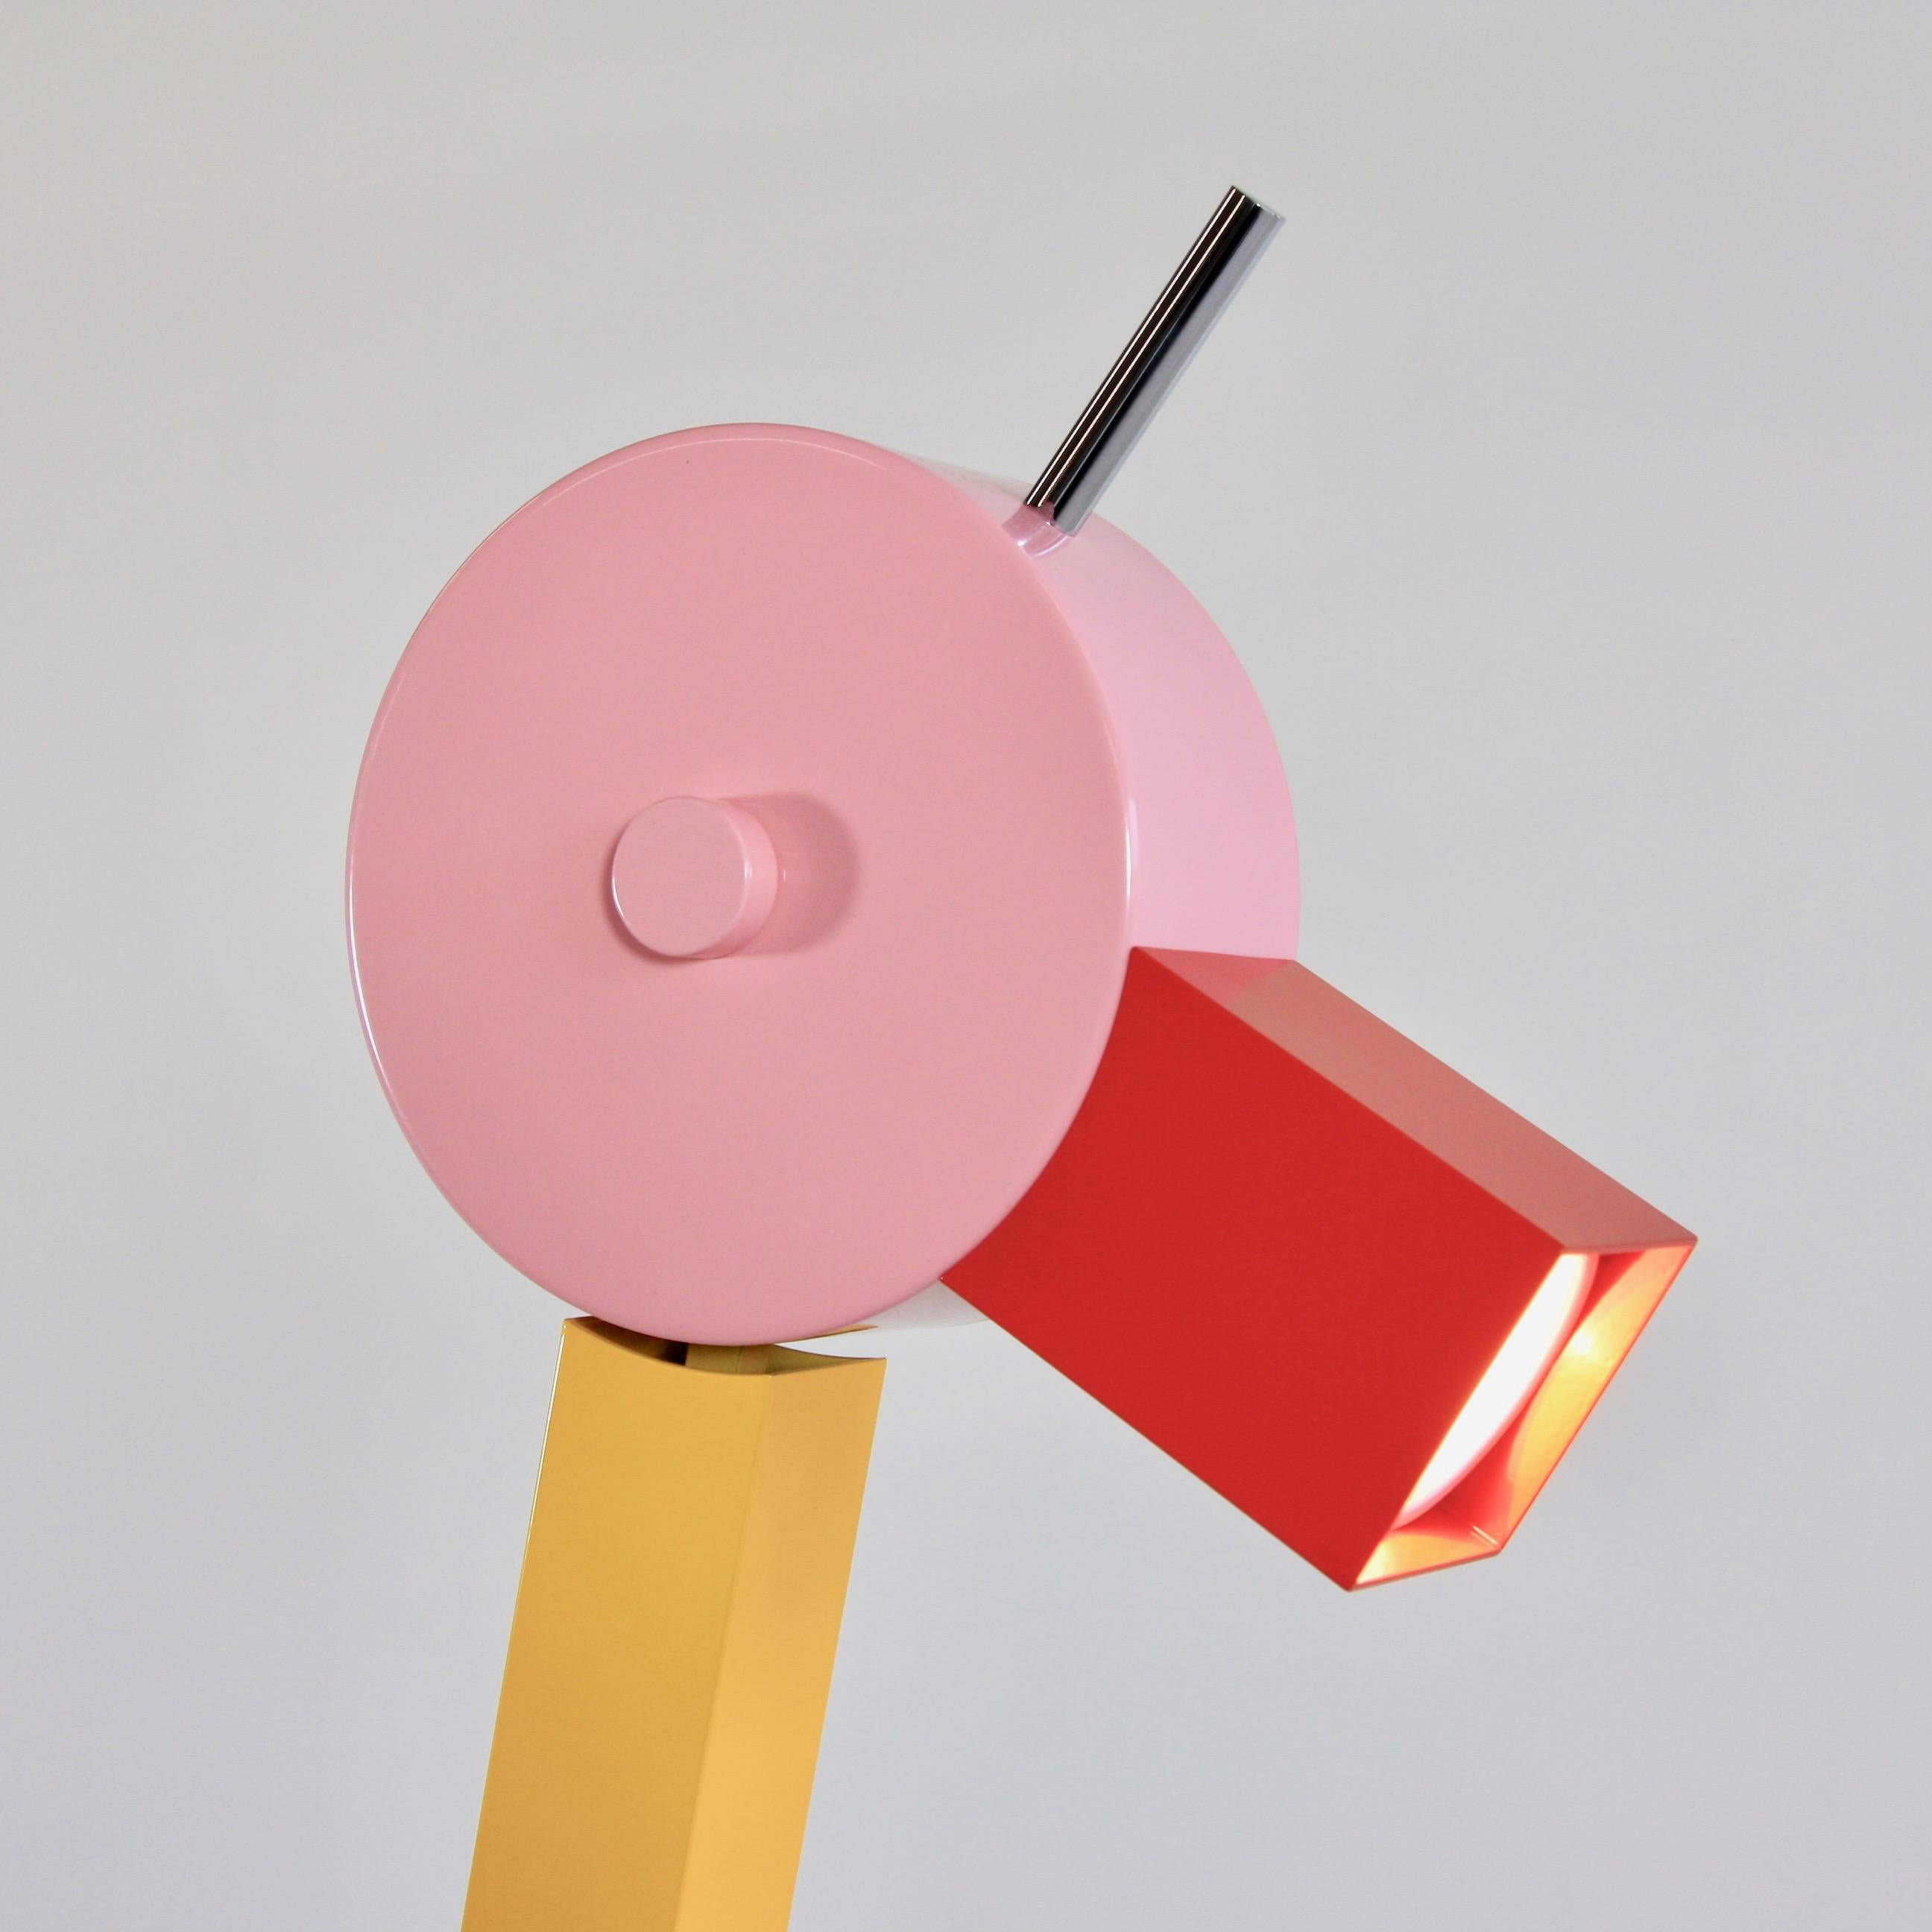 Tahiti table lamp, designed by Ettore Sottsass, Italy, 1981.

Metal construction, wooden base with laminate and head with halogen lamp, 'The Duck'. With original metal label.

Reference: Fiell. 1000 Lights. 1960 to present. P. 316,